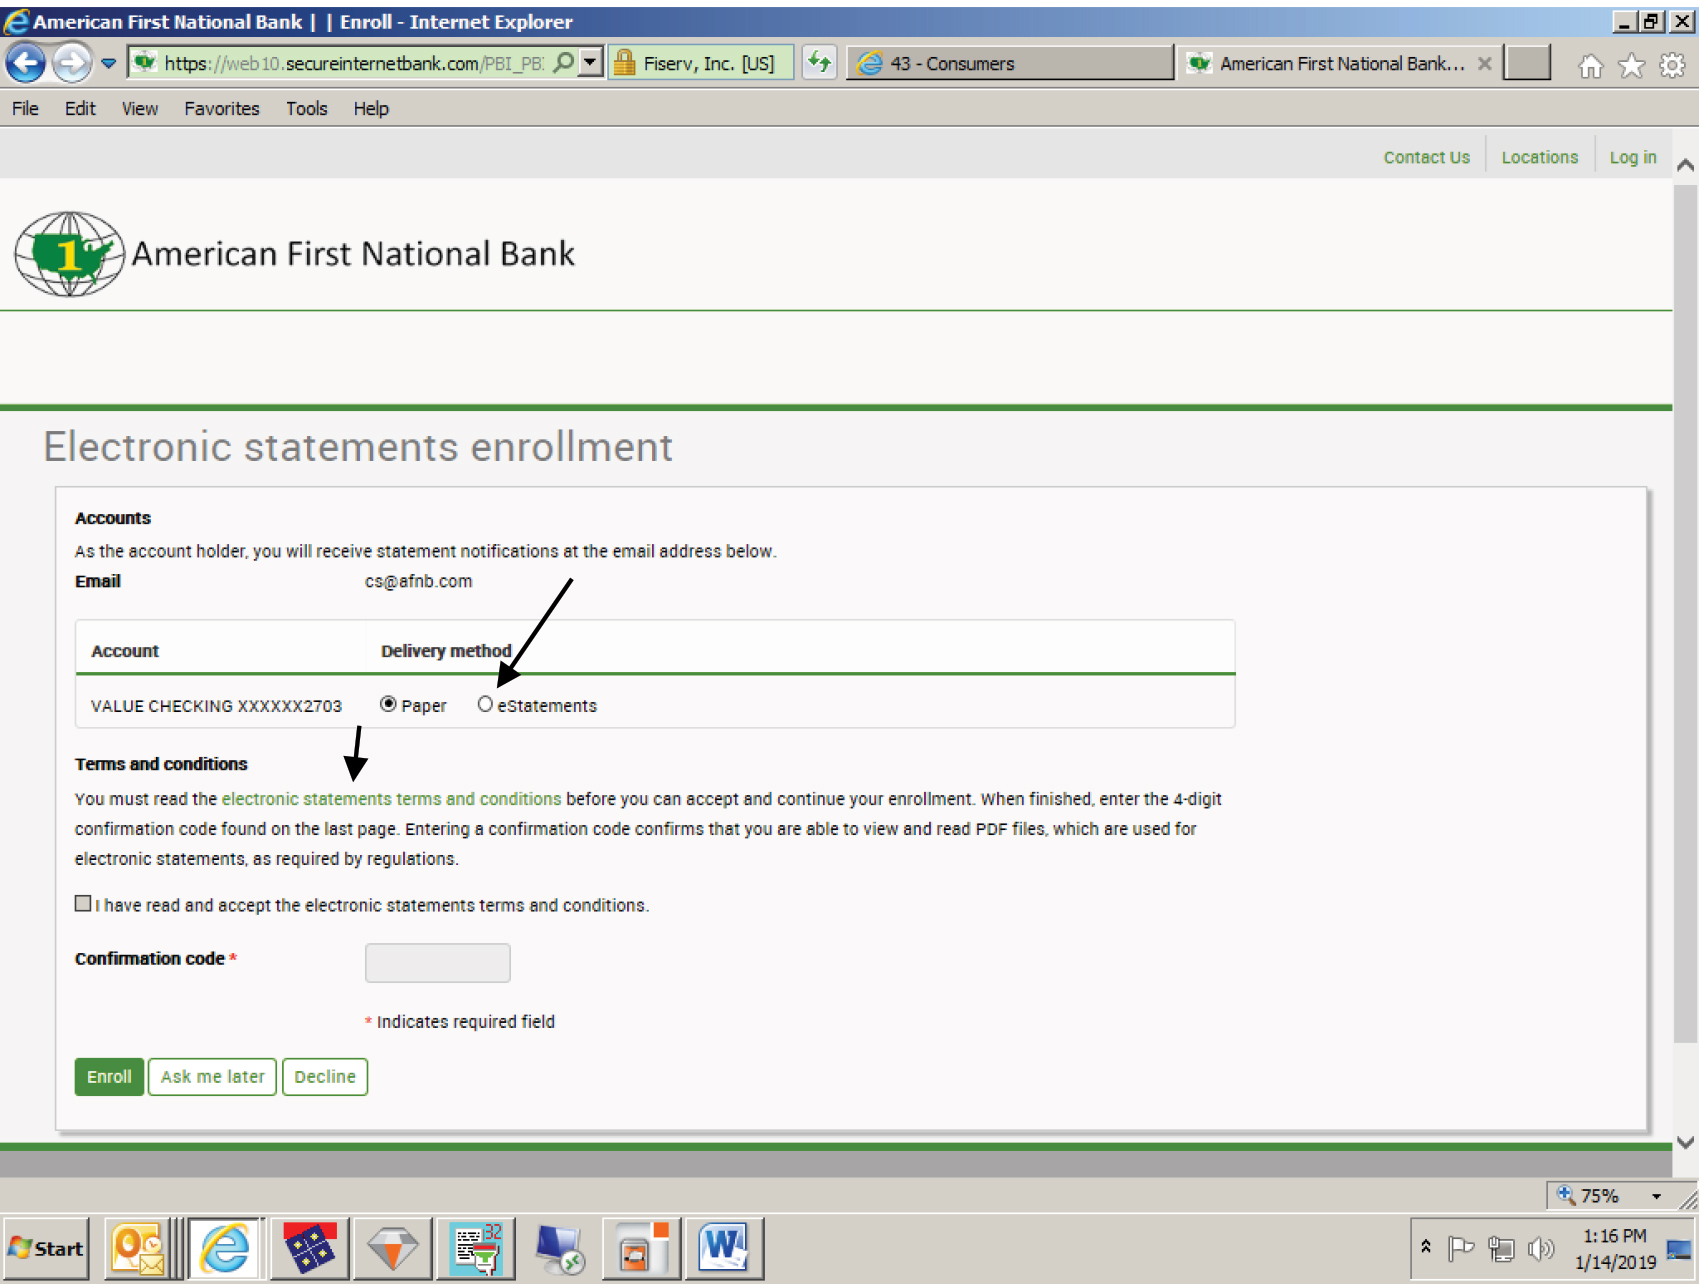 Screencap of E-statement enrollment Terms and Conditions